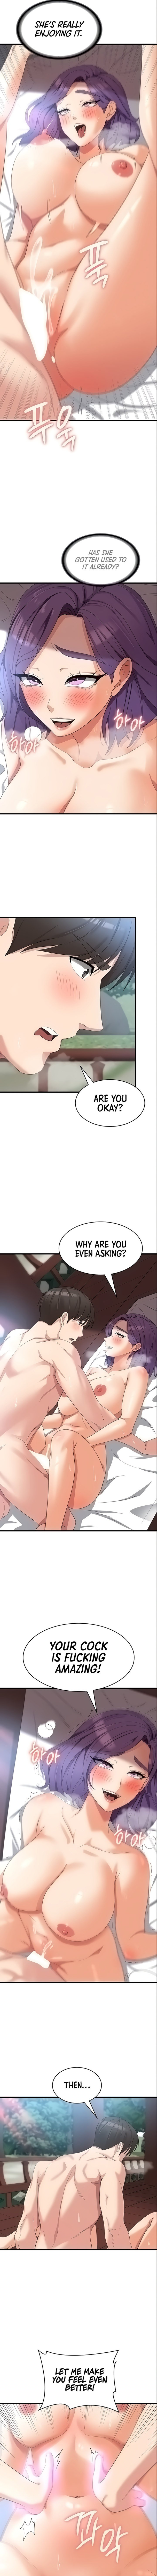 sexy-man-and-woman-chap-30-7